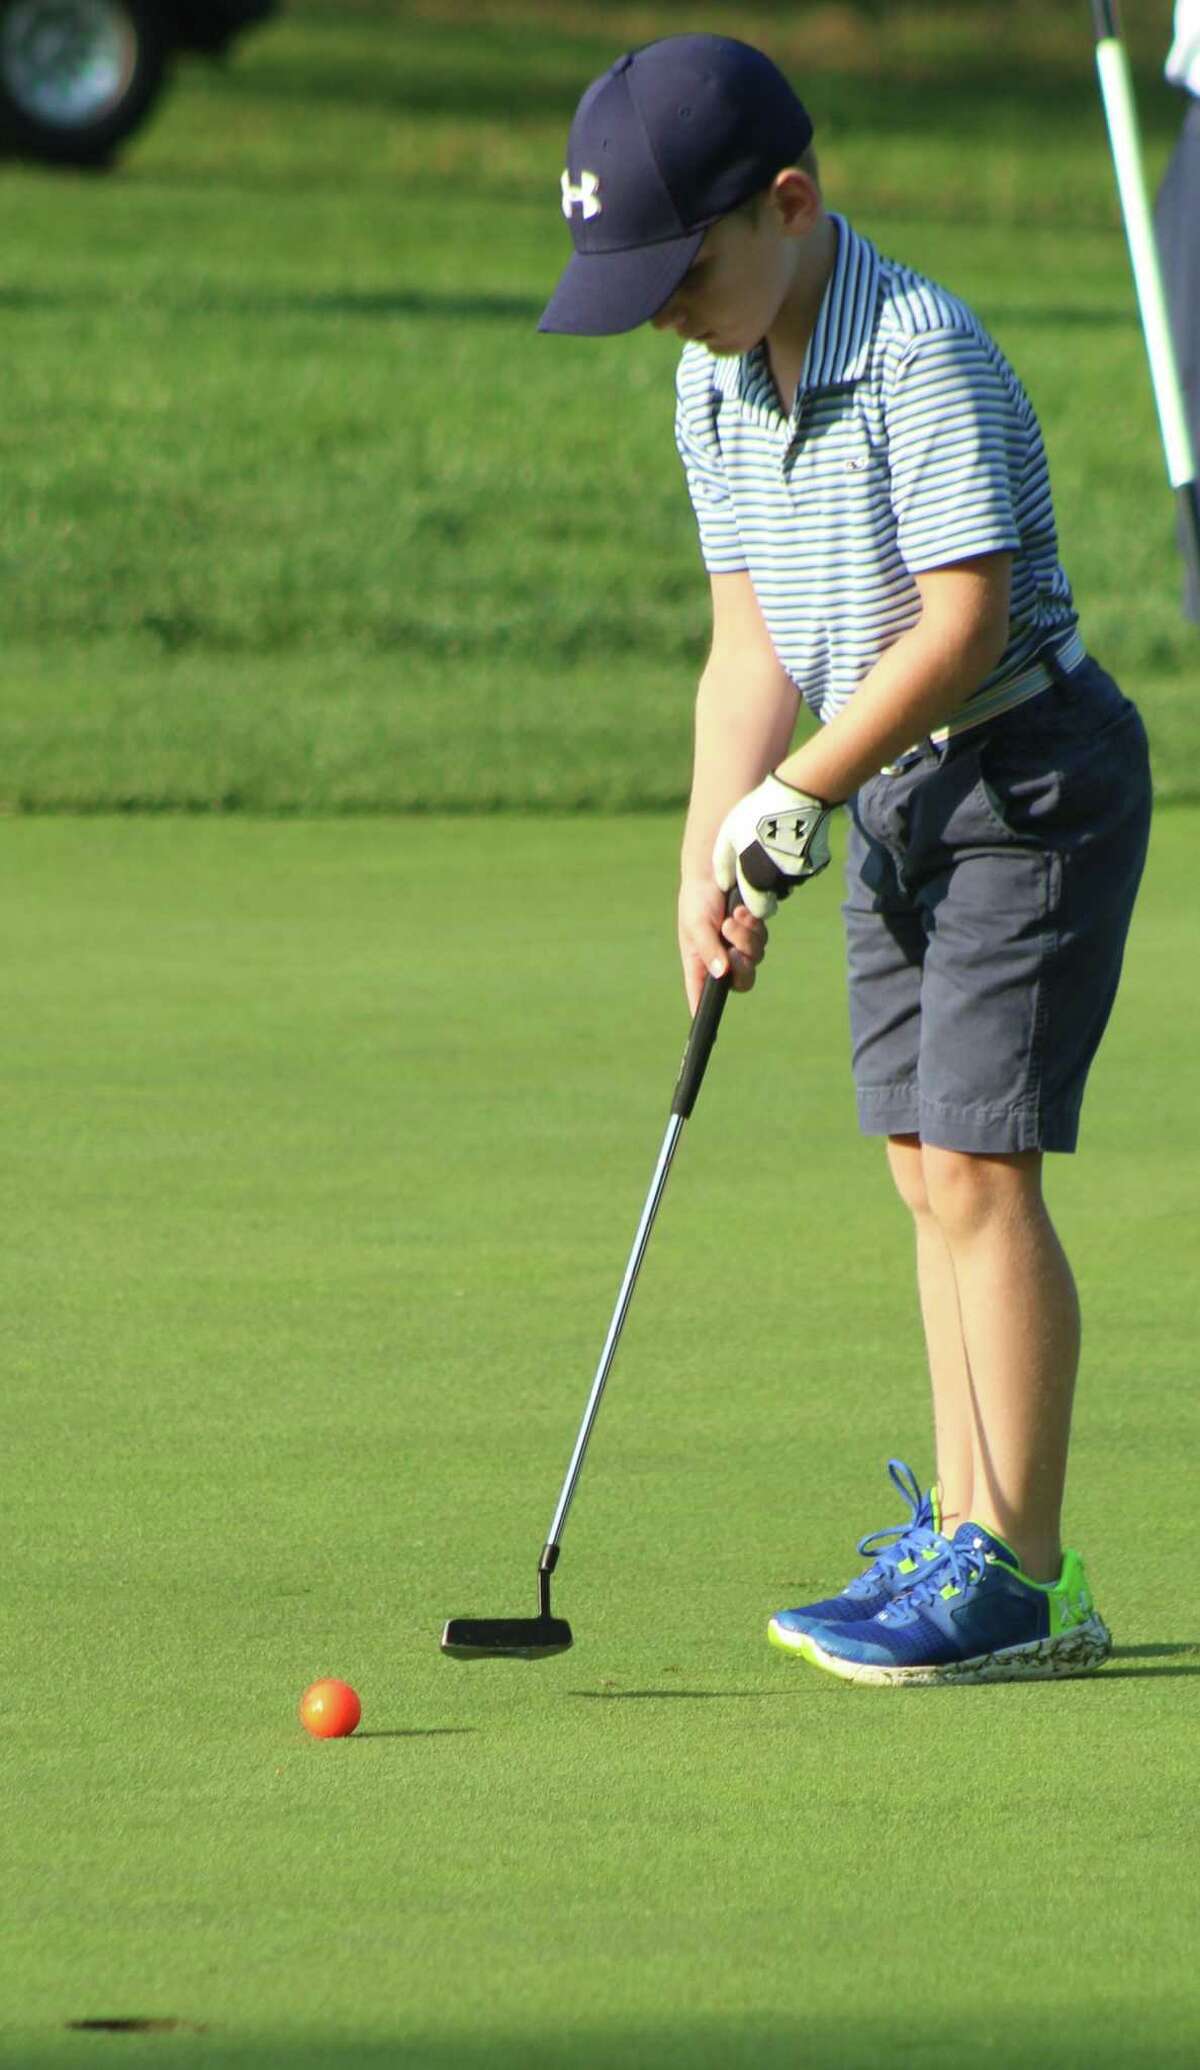 Jack Schonfeld putts on the 18th green at the Fran McCarthy Junior Golf Tournament at Richter Park Golf Course in Danbury Aug. 21, 2017.